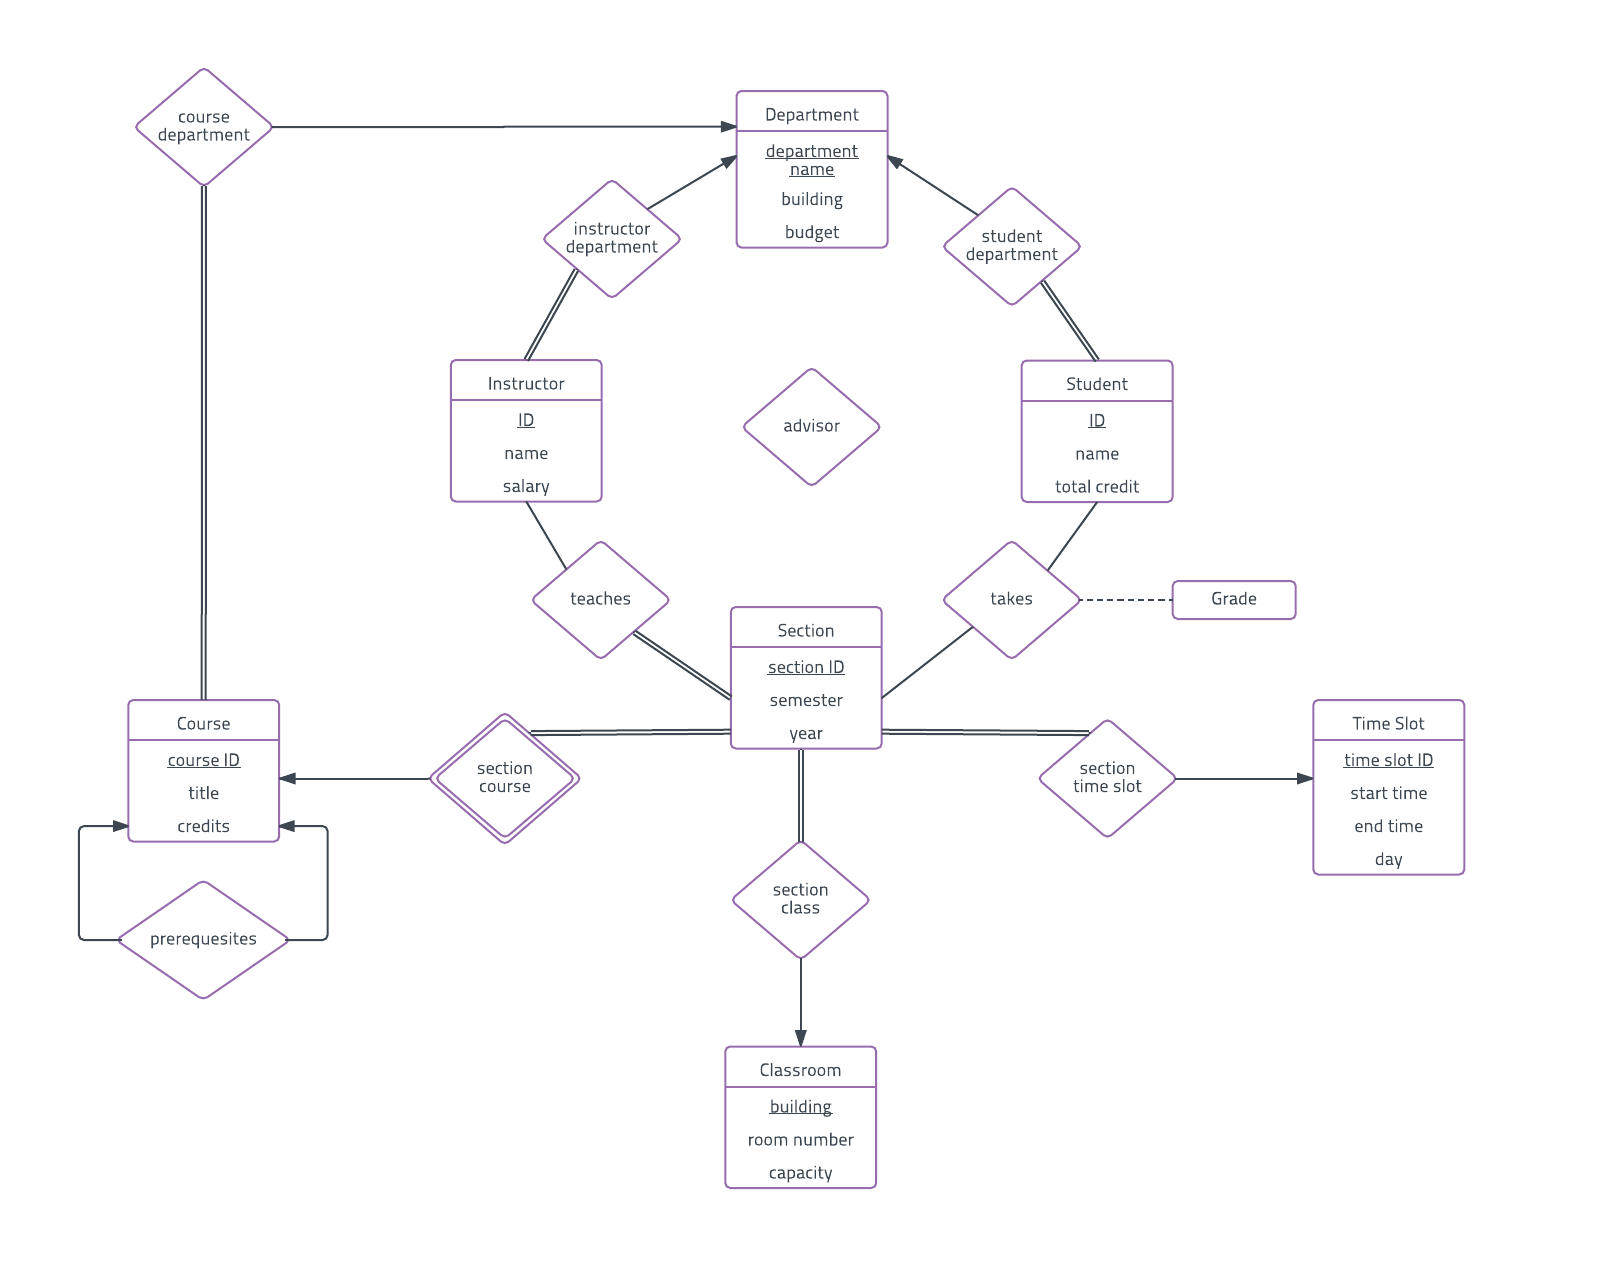 Er Diagram Examples And Templates | Lucidchart inside Entity Relationship Model Examples